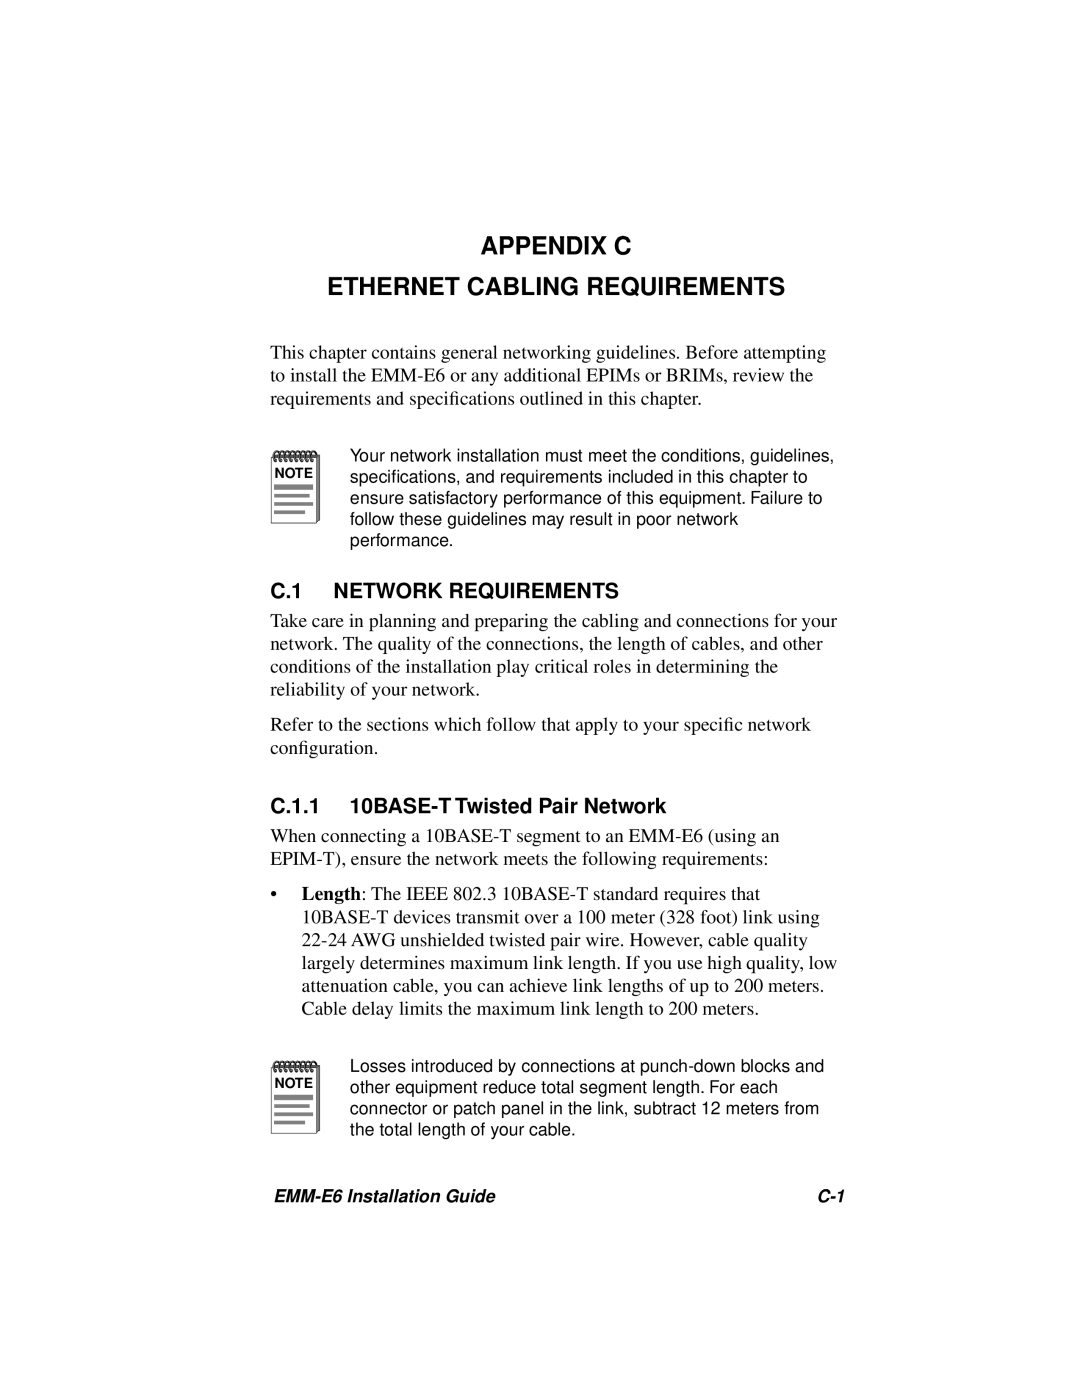 Cabletron Systems EMM-E6 manual Appendix C Ethernet Cabling Requirements, C.1 NETWORK REQUIREMENTS 